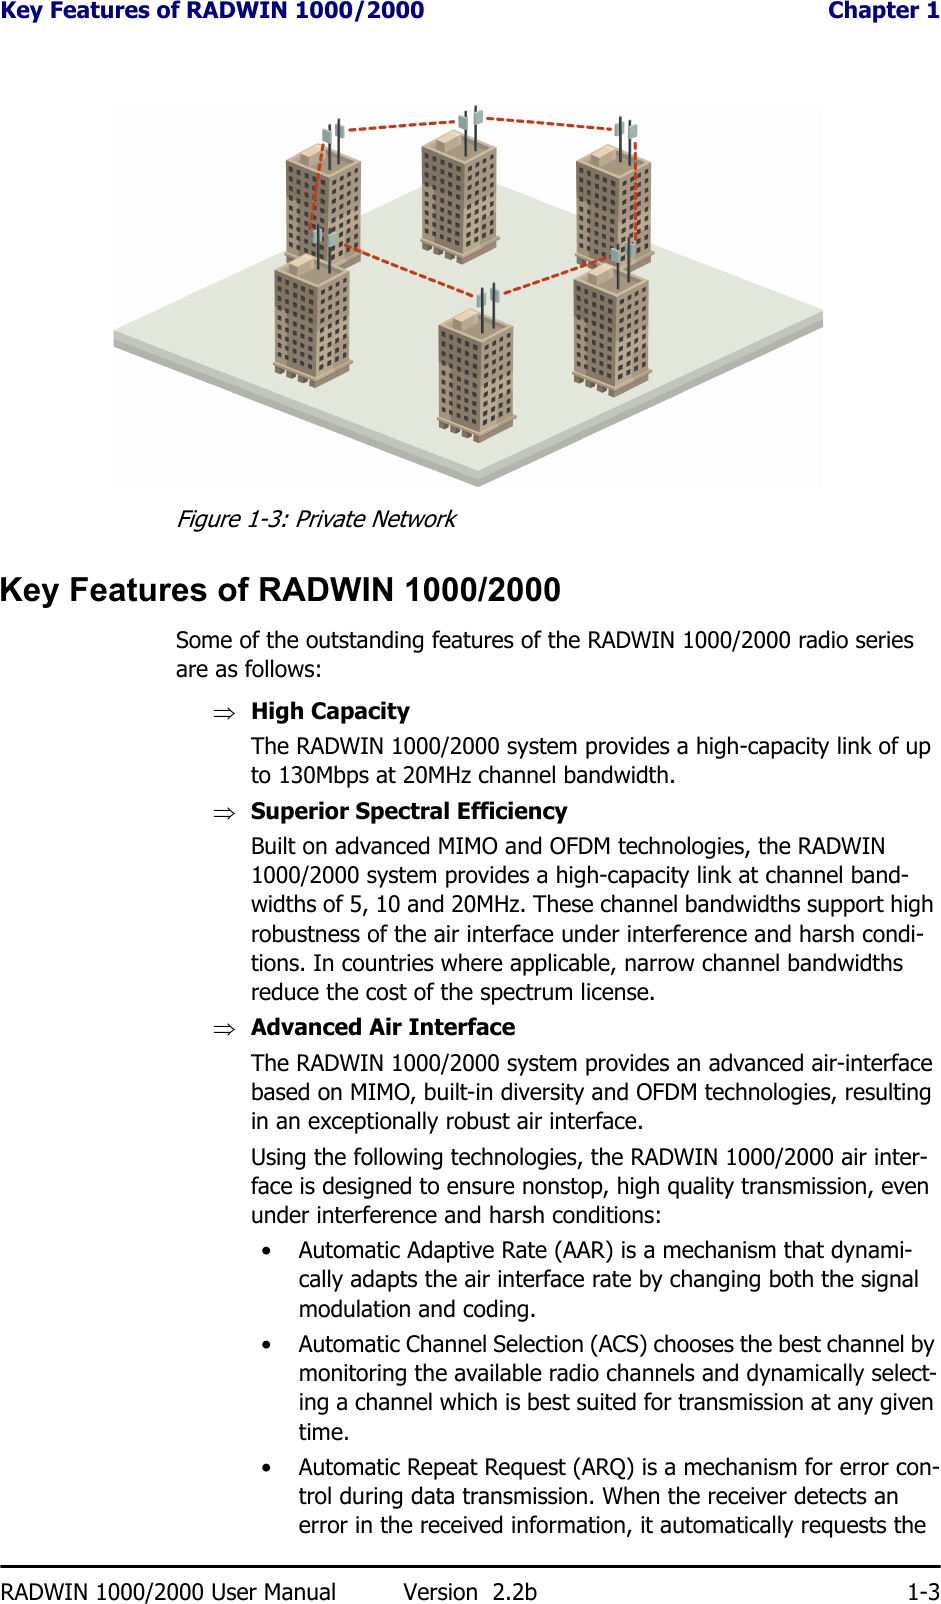 Key Features of RADWIN 1000/2000  Chapter 1RADWIN 1000/2000 User Manual Version  2.2b 1-3Figure 1-3: Private NetworkKey Features of RADWIN 1000/2000Some of the outstanding features of the RADWIN 1000/2000 radio series are as follows:⇒High CapacityThe RADWIN 1000/2000 system provides a high-capacity link of up to 130Mbps at 20MHz channel bandwidth.⇒Superior Spectral EfficiencyBuilt on advanced MIMO and OFDM technologies, the RADWIN 1000/2000 system provides a high-capacity link at channel band-widths of 5, 10 and 20MHz. These channel bandwidths support high robustness of the air interface under interference and harsh condi-tions. In countries where applicable, narrow channel bandwidths reduce the cost of the spectrum license.⇒Advanced Air InterfaceThe RADWIN 1000/2000 system provides an advanced air-interface based on MIMO, built-in diversity and OFDM technologies, resulting in an exceptionally robust air interface. Using the following technologies, the RADWIN 1000/2000 air inter-face is designed to ensure nonstop, high quality transmission, even under interference and harsh conditions:• Automatic Adaptive Rate (AAR) is a mechanism that dynami-cally adapts the air interface rate by changing both the signal modulation and coding.• Automatic Channel Selection (ACS) chooses the best channel by monitoring the available radio channels and dynamically select-ing a channel which is best suited for transmission at any given time.• Automatic Repeat Request (ARQ) is a mechanism for error con-trol during data transmission. When the receiver detects an error in the received information, it automatically requests the 